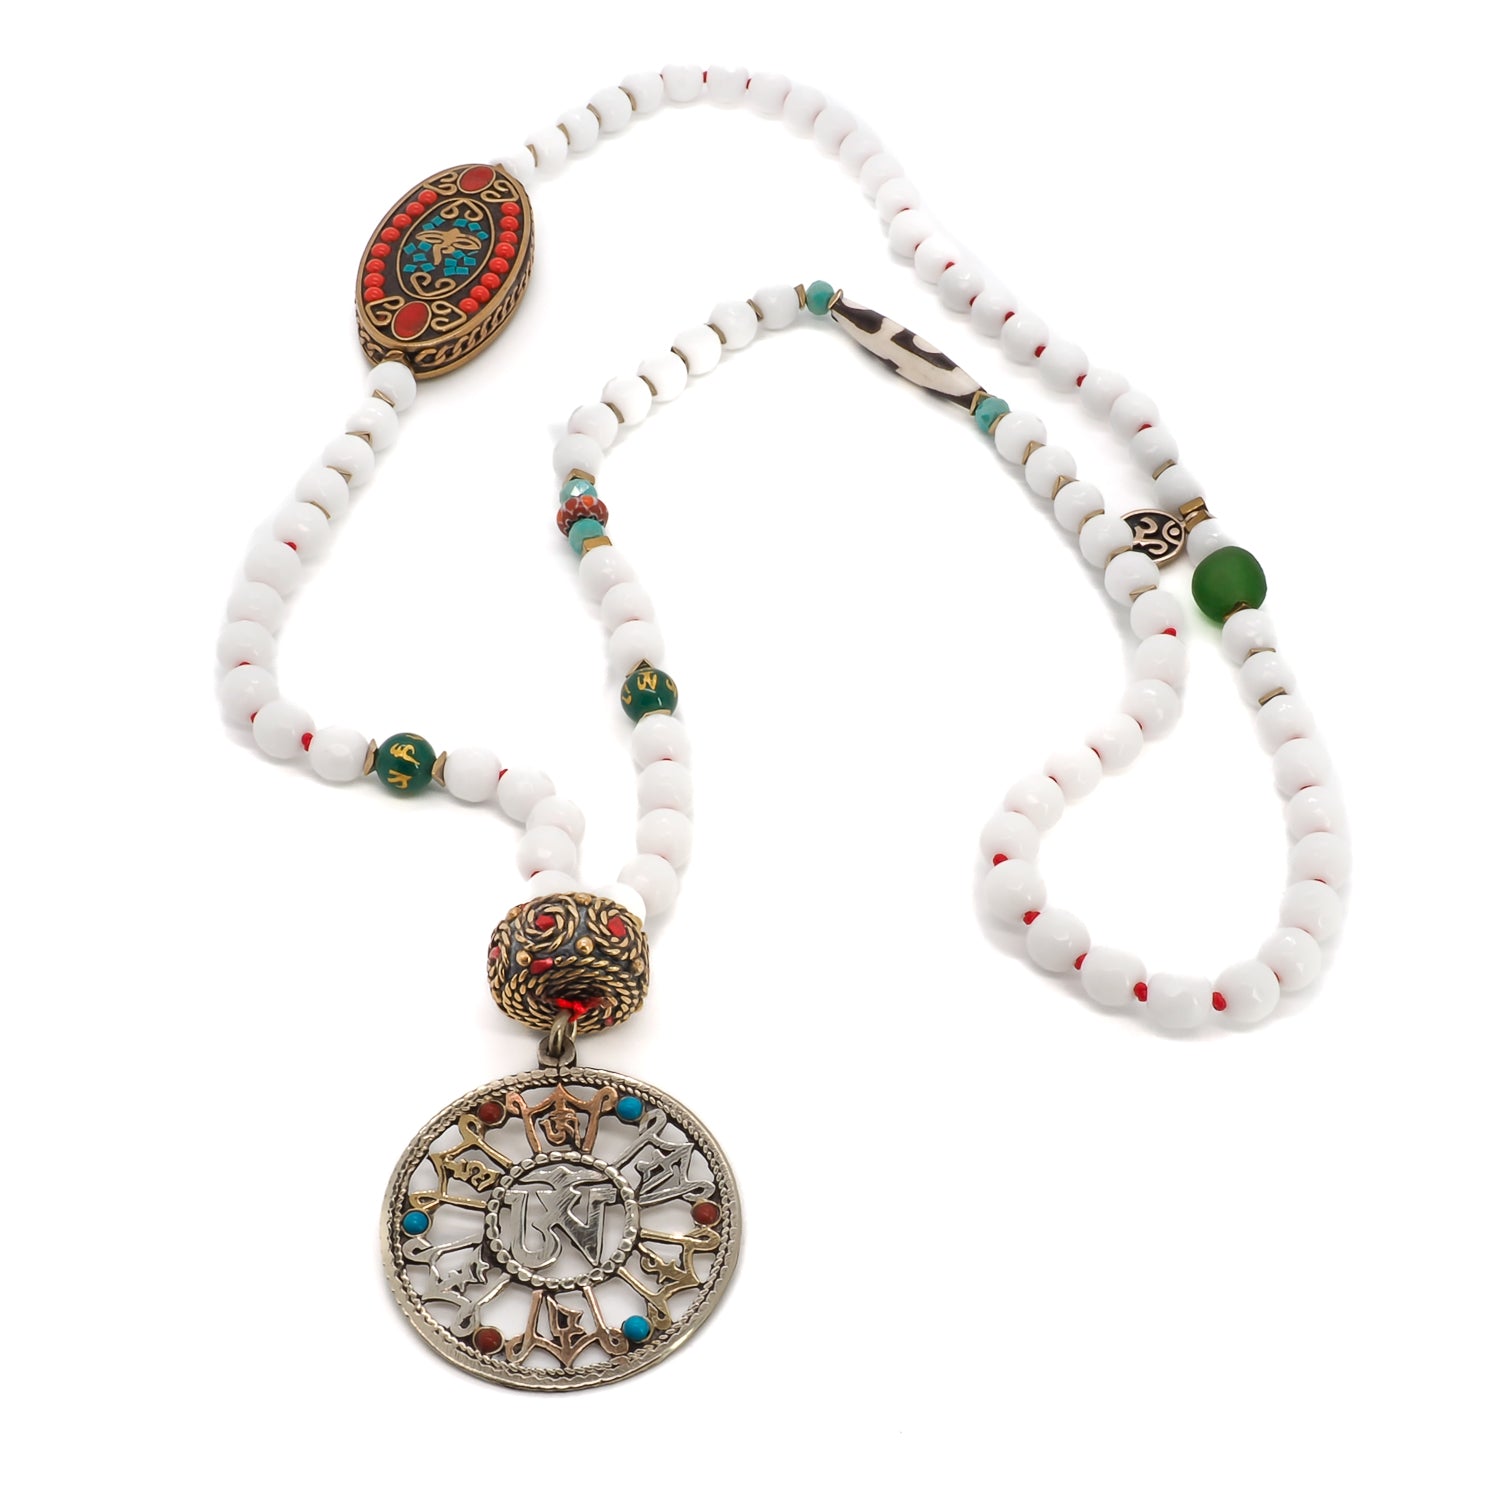 Meaningful Buddha Talisman Necklace - Handcrafted accessory with white Jade beads, Nepal tube beads, and a gold-plated Om Mani Padme Hum pendant.